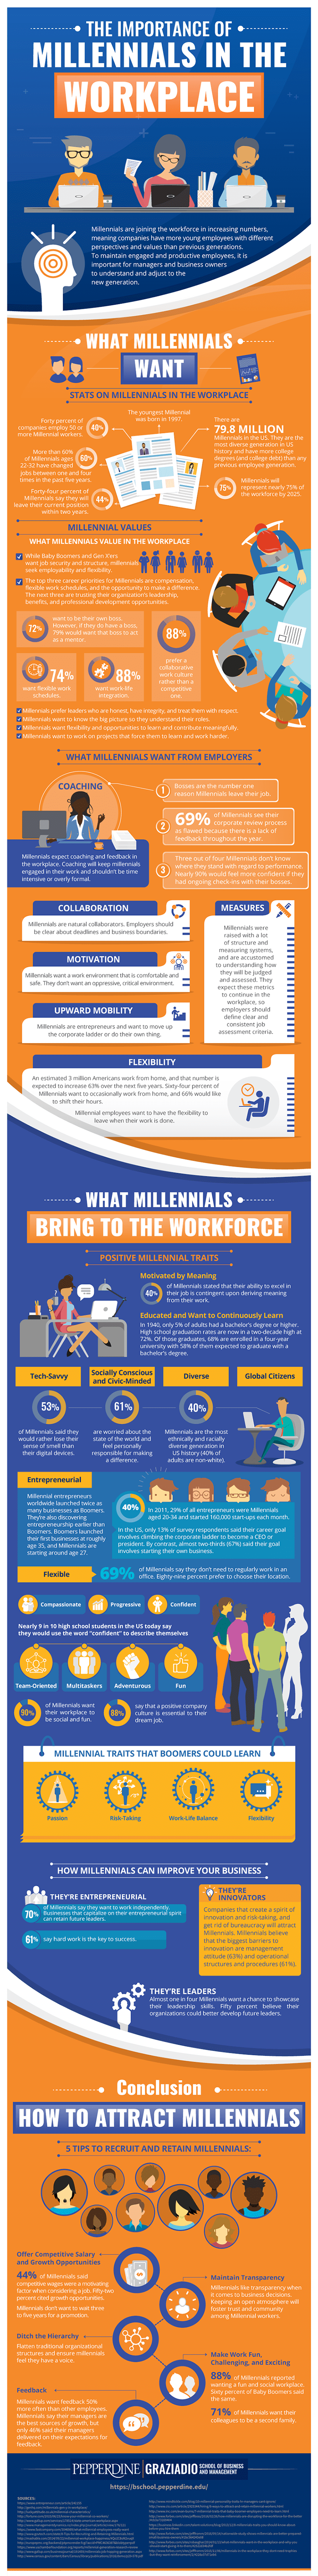 How to Attract and Retain Millennials